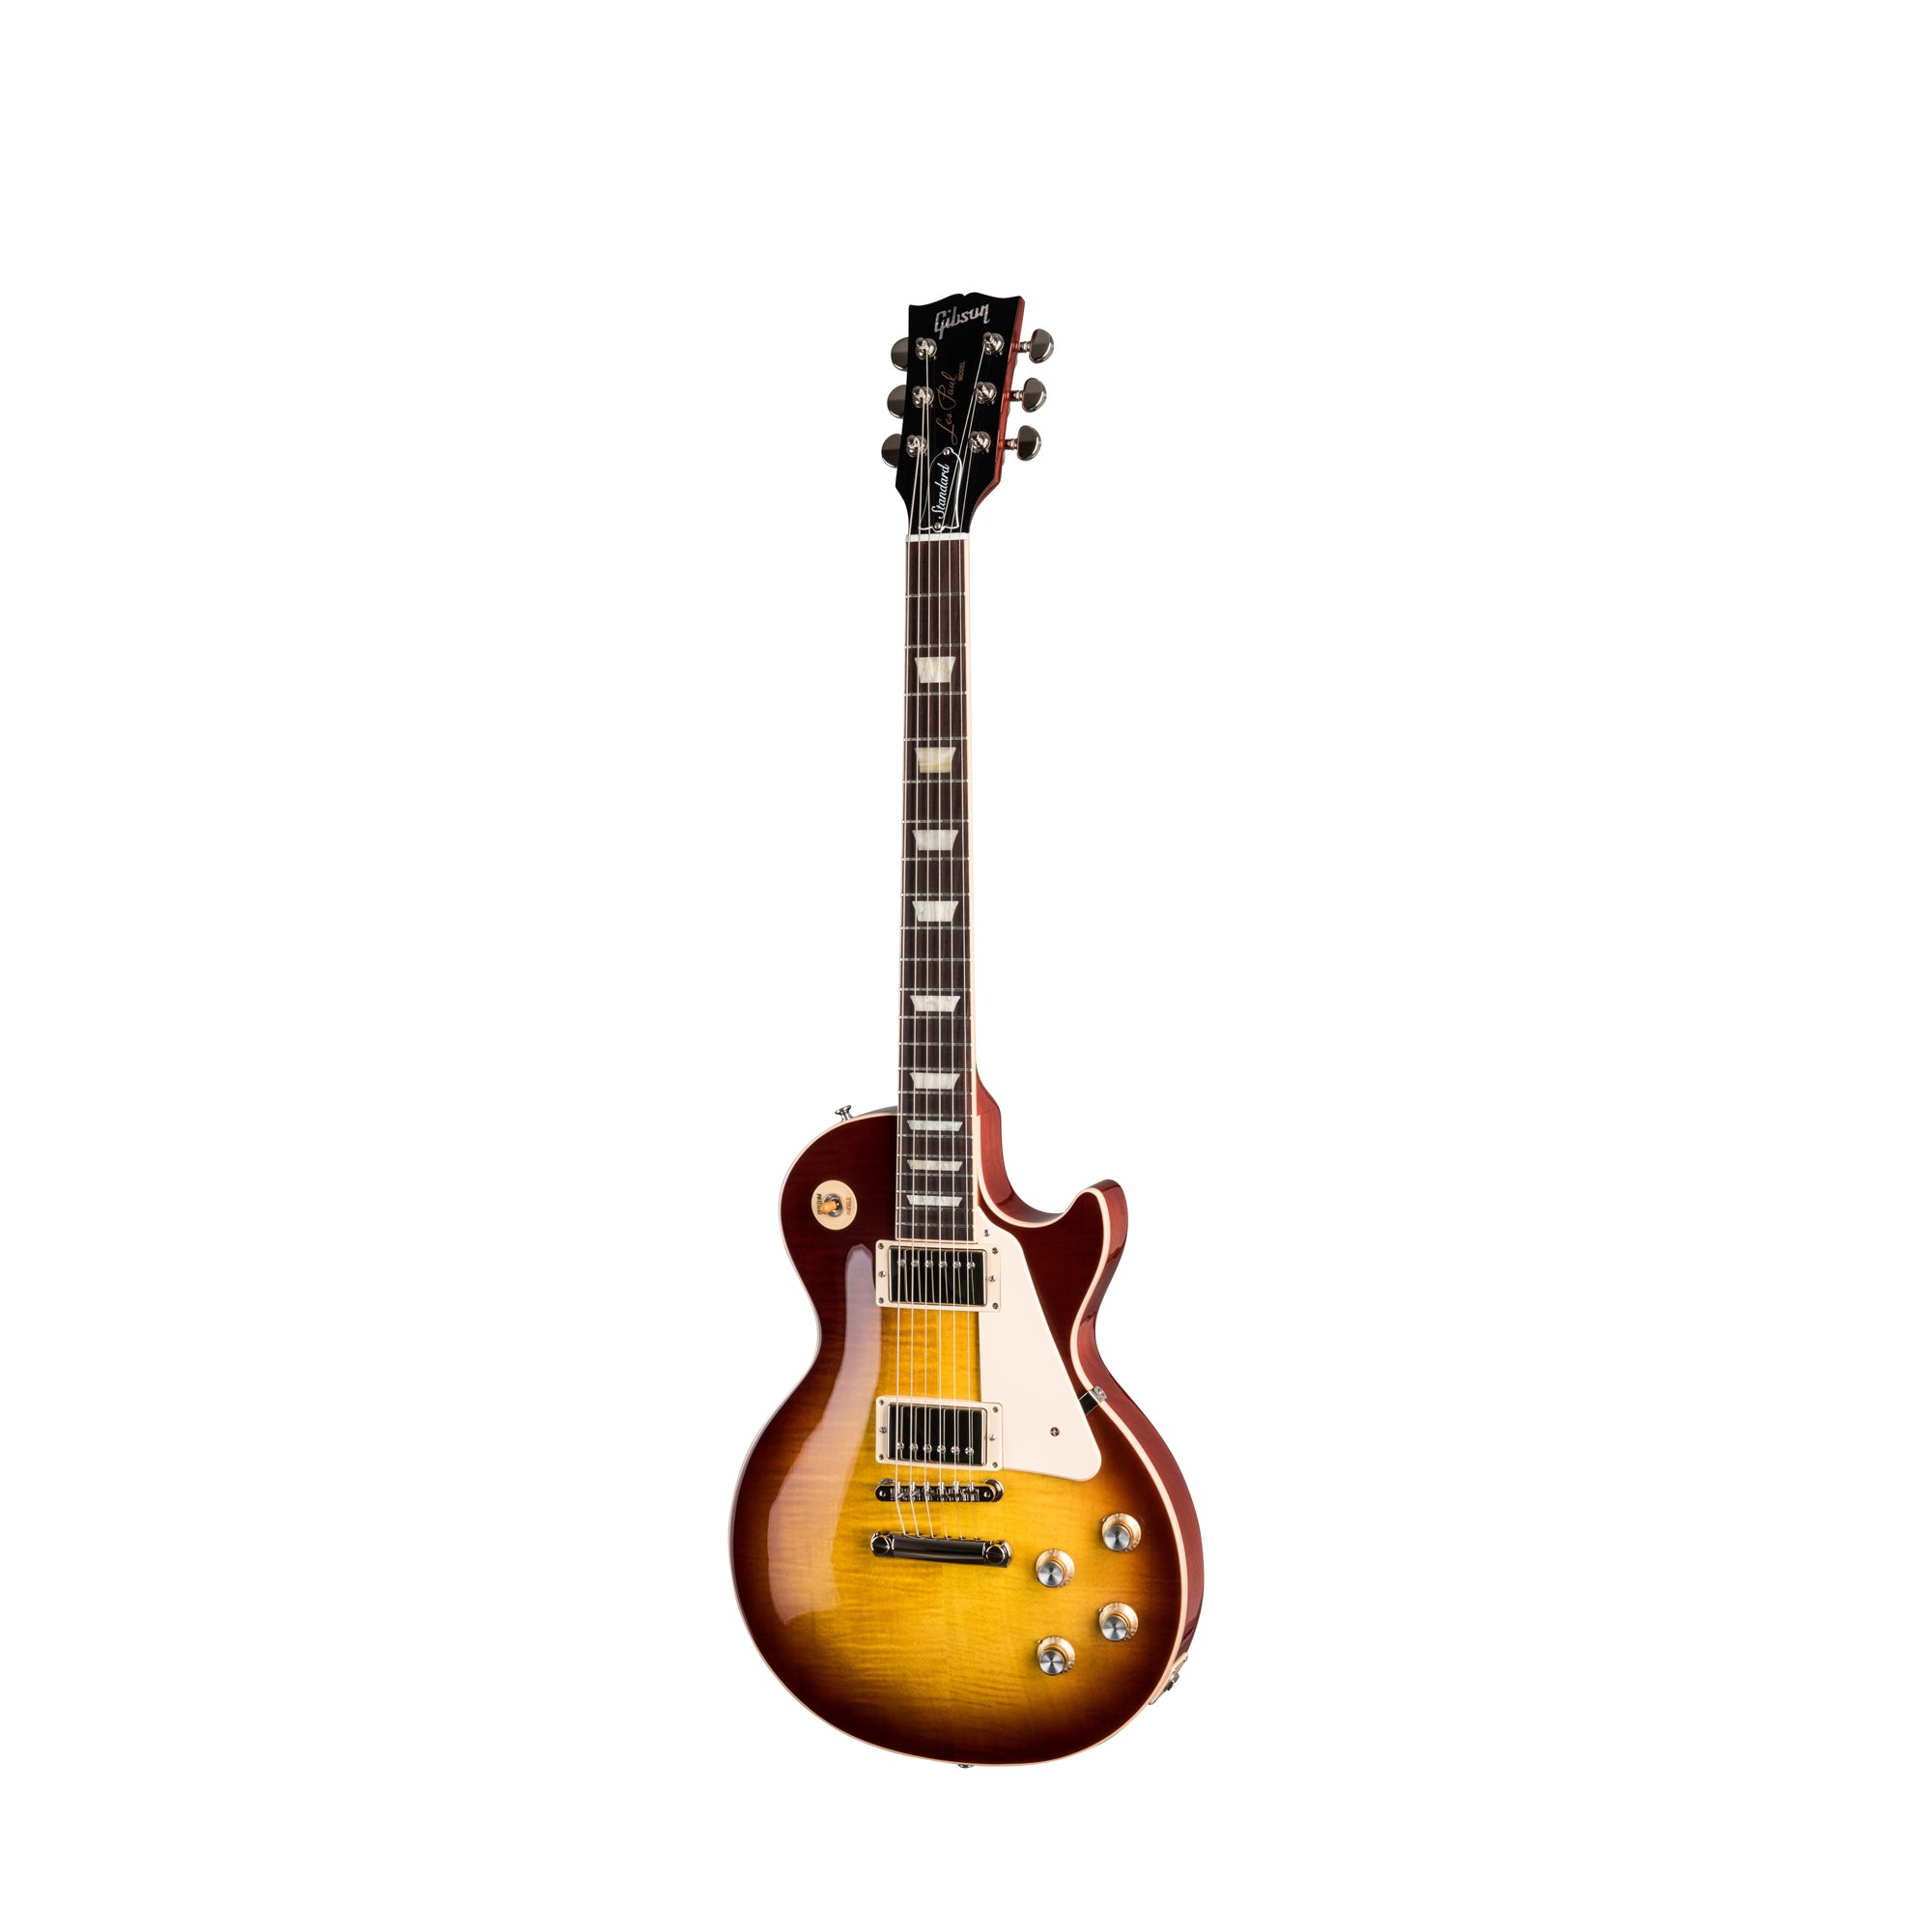 Gibson LPS600ITNH1 Les Paul Standard '60s Electric Guitar - Iced Tea